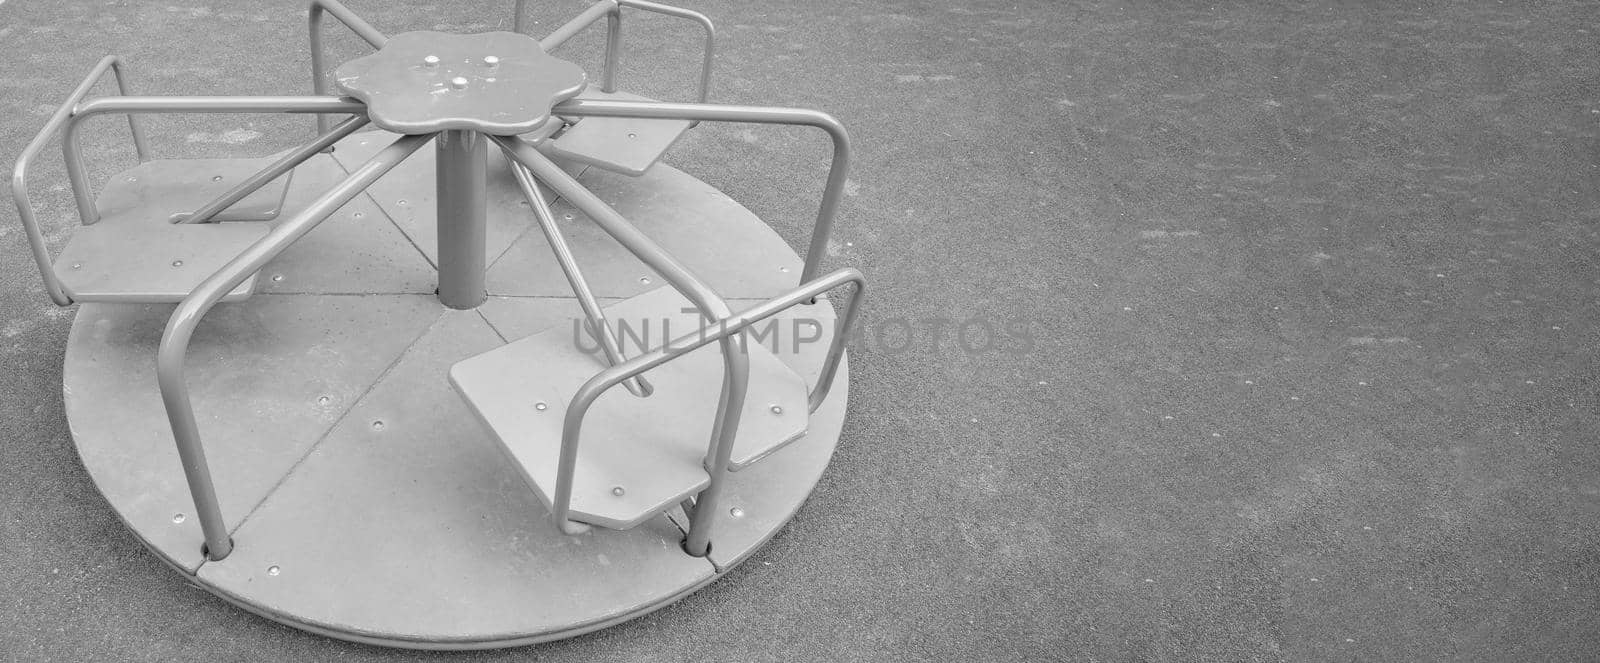 Steel round carousel on the playground, copy of the space on the right, monochrome by claire_lucia